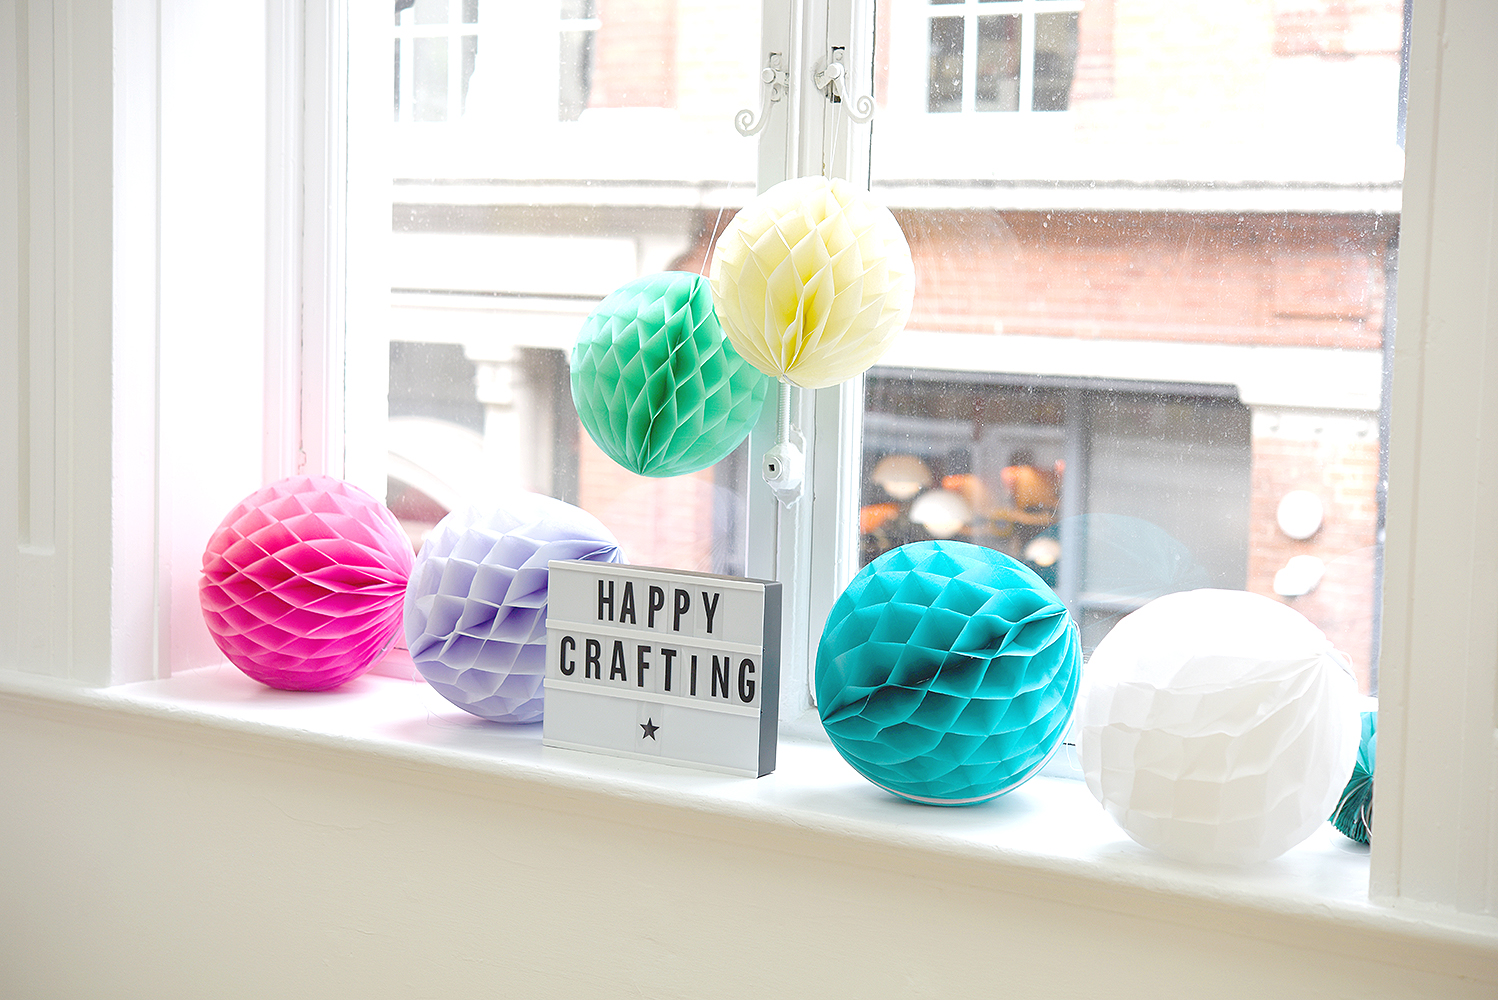 Paper lanterns in front of the large window with happy crafting lightbox